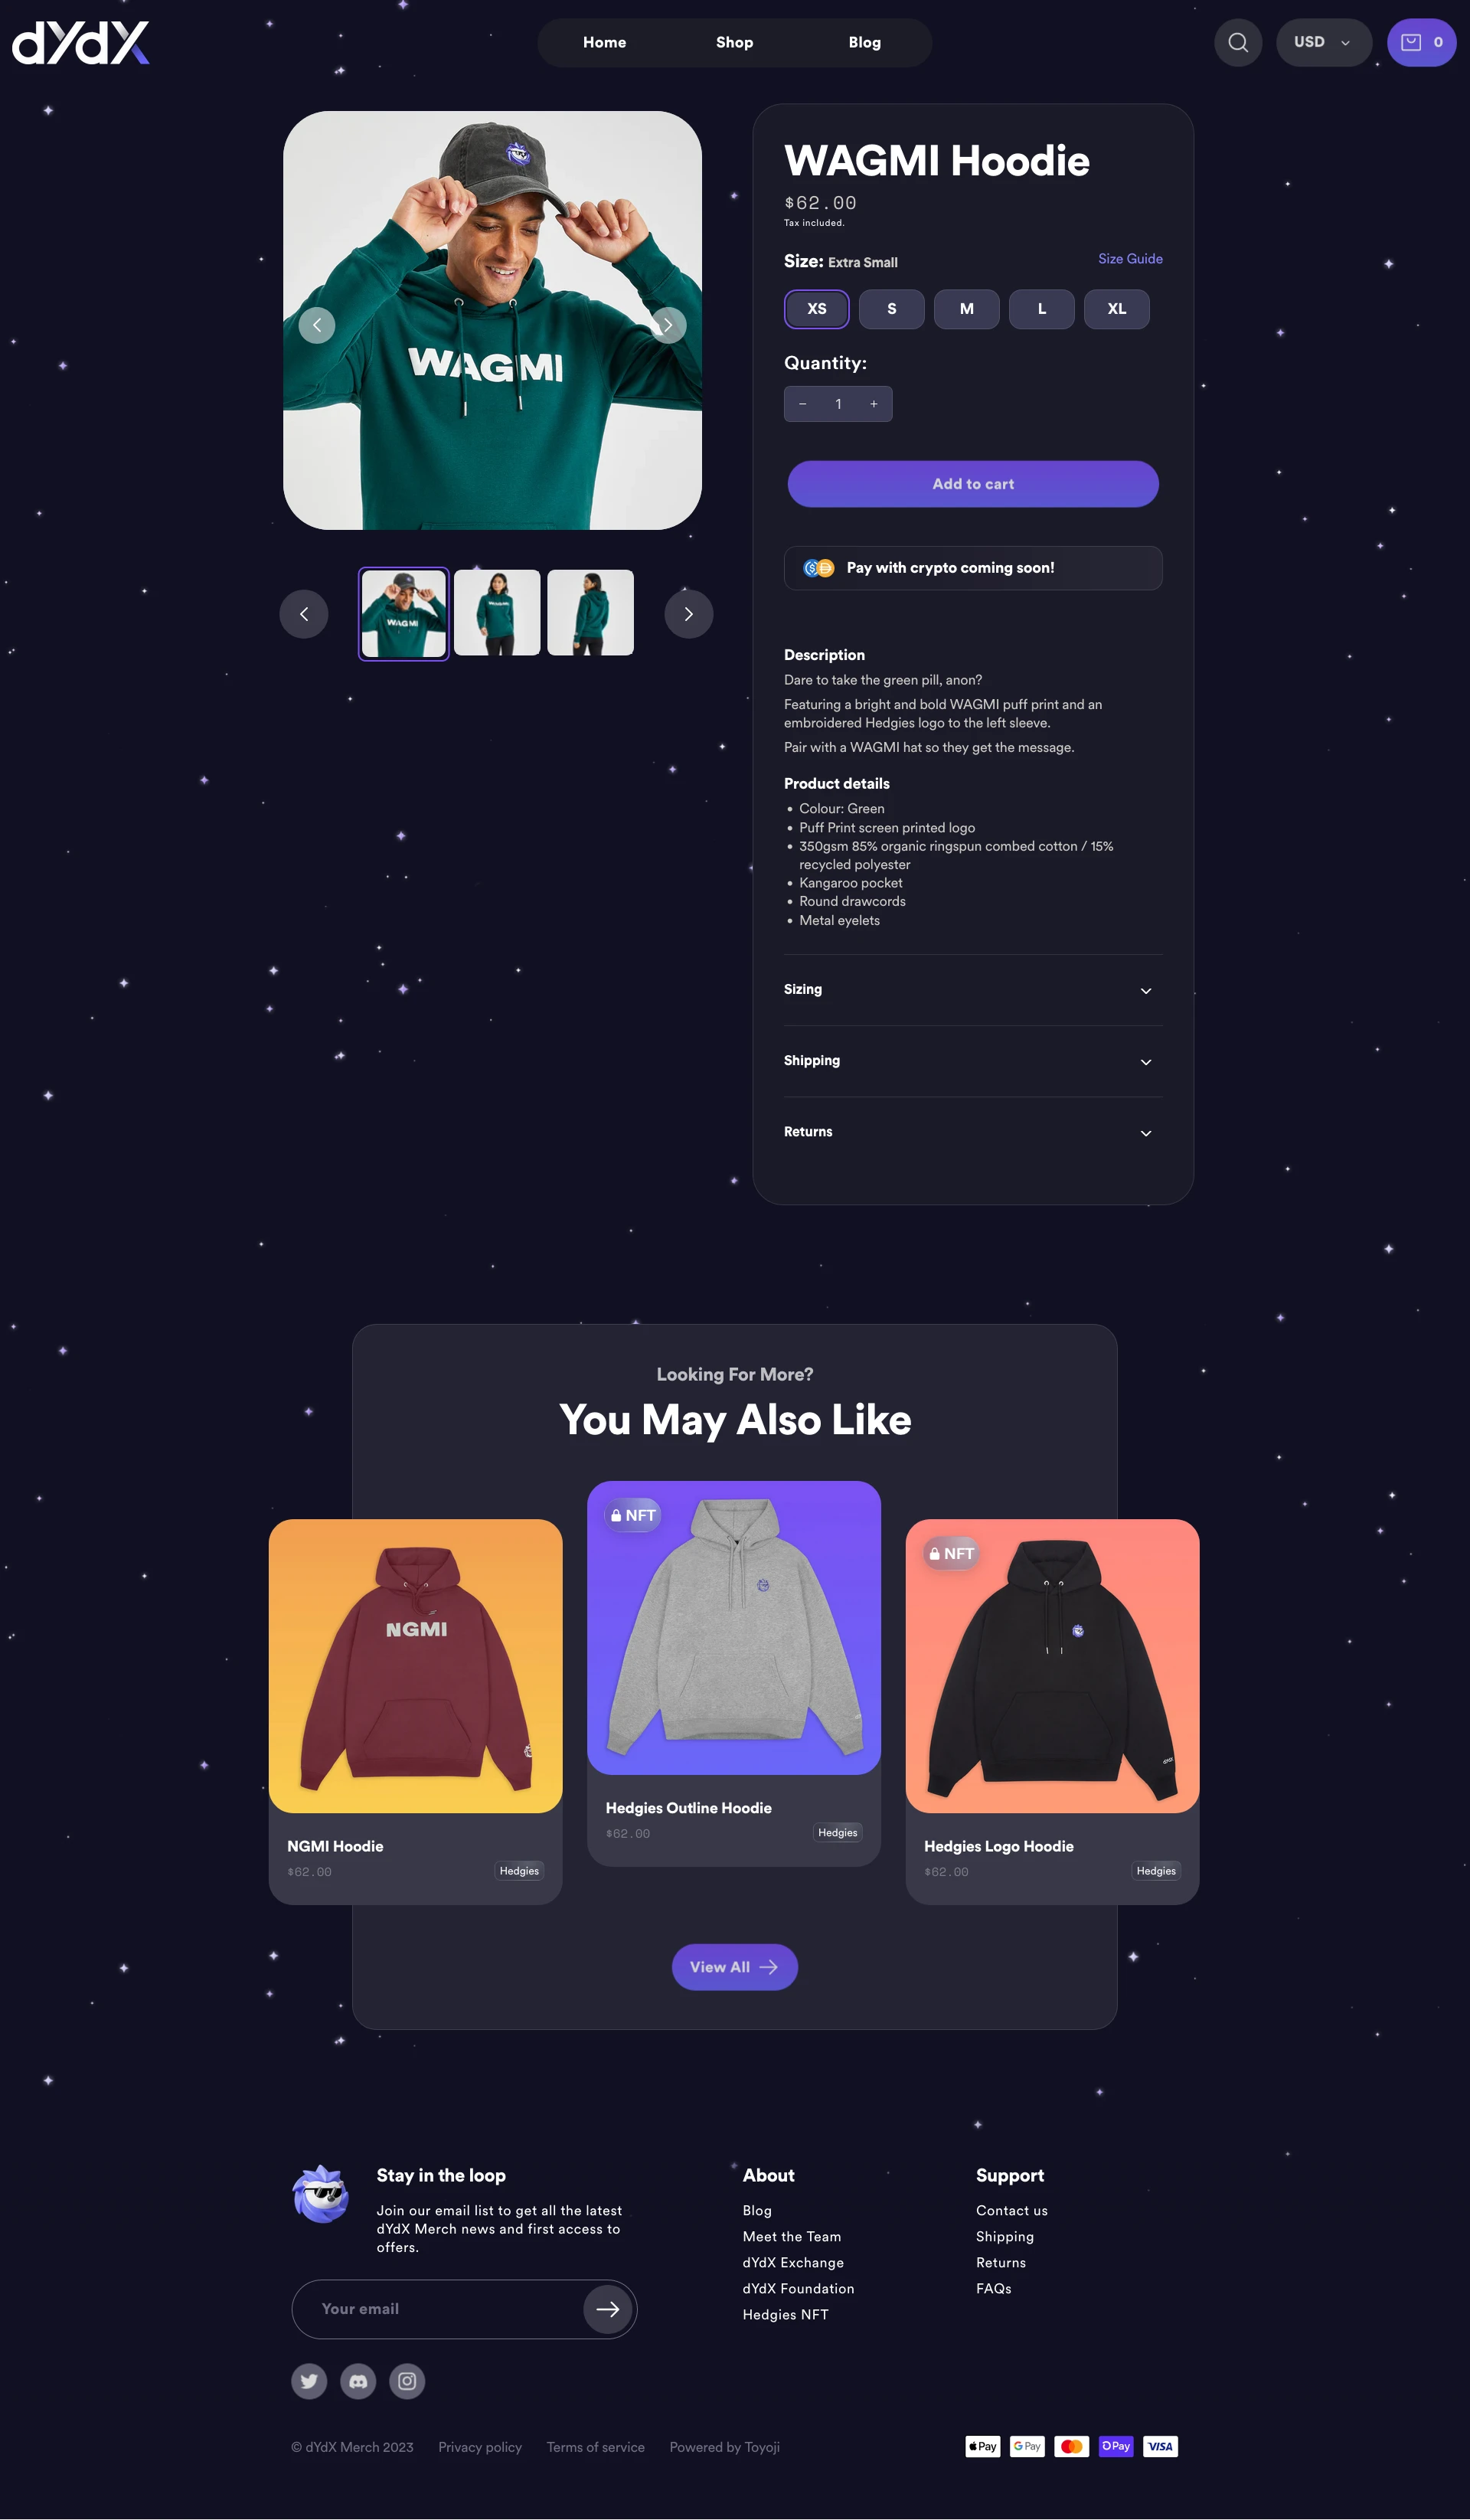 dYdX Merch Landing Page Example: Unleash your trading potential with high quality apparel, hats, and accessories from dYdX.